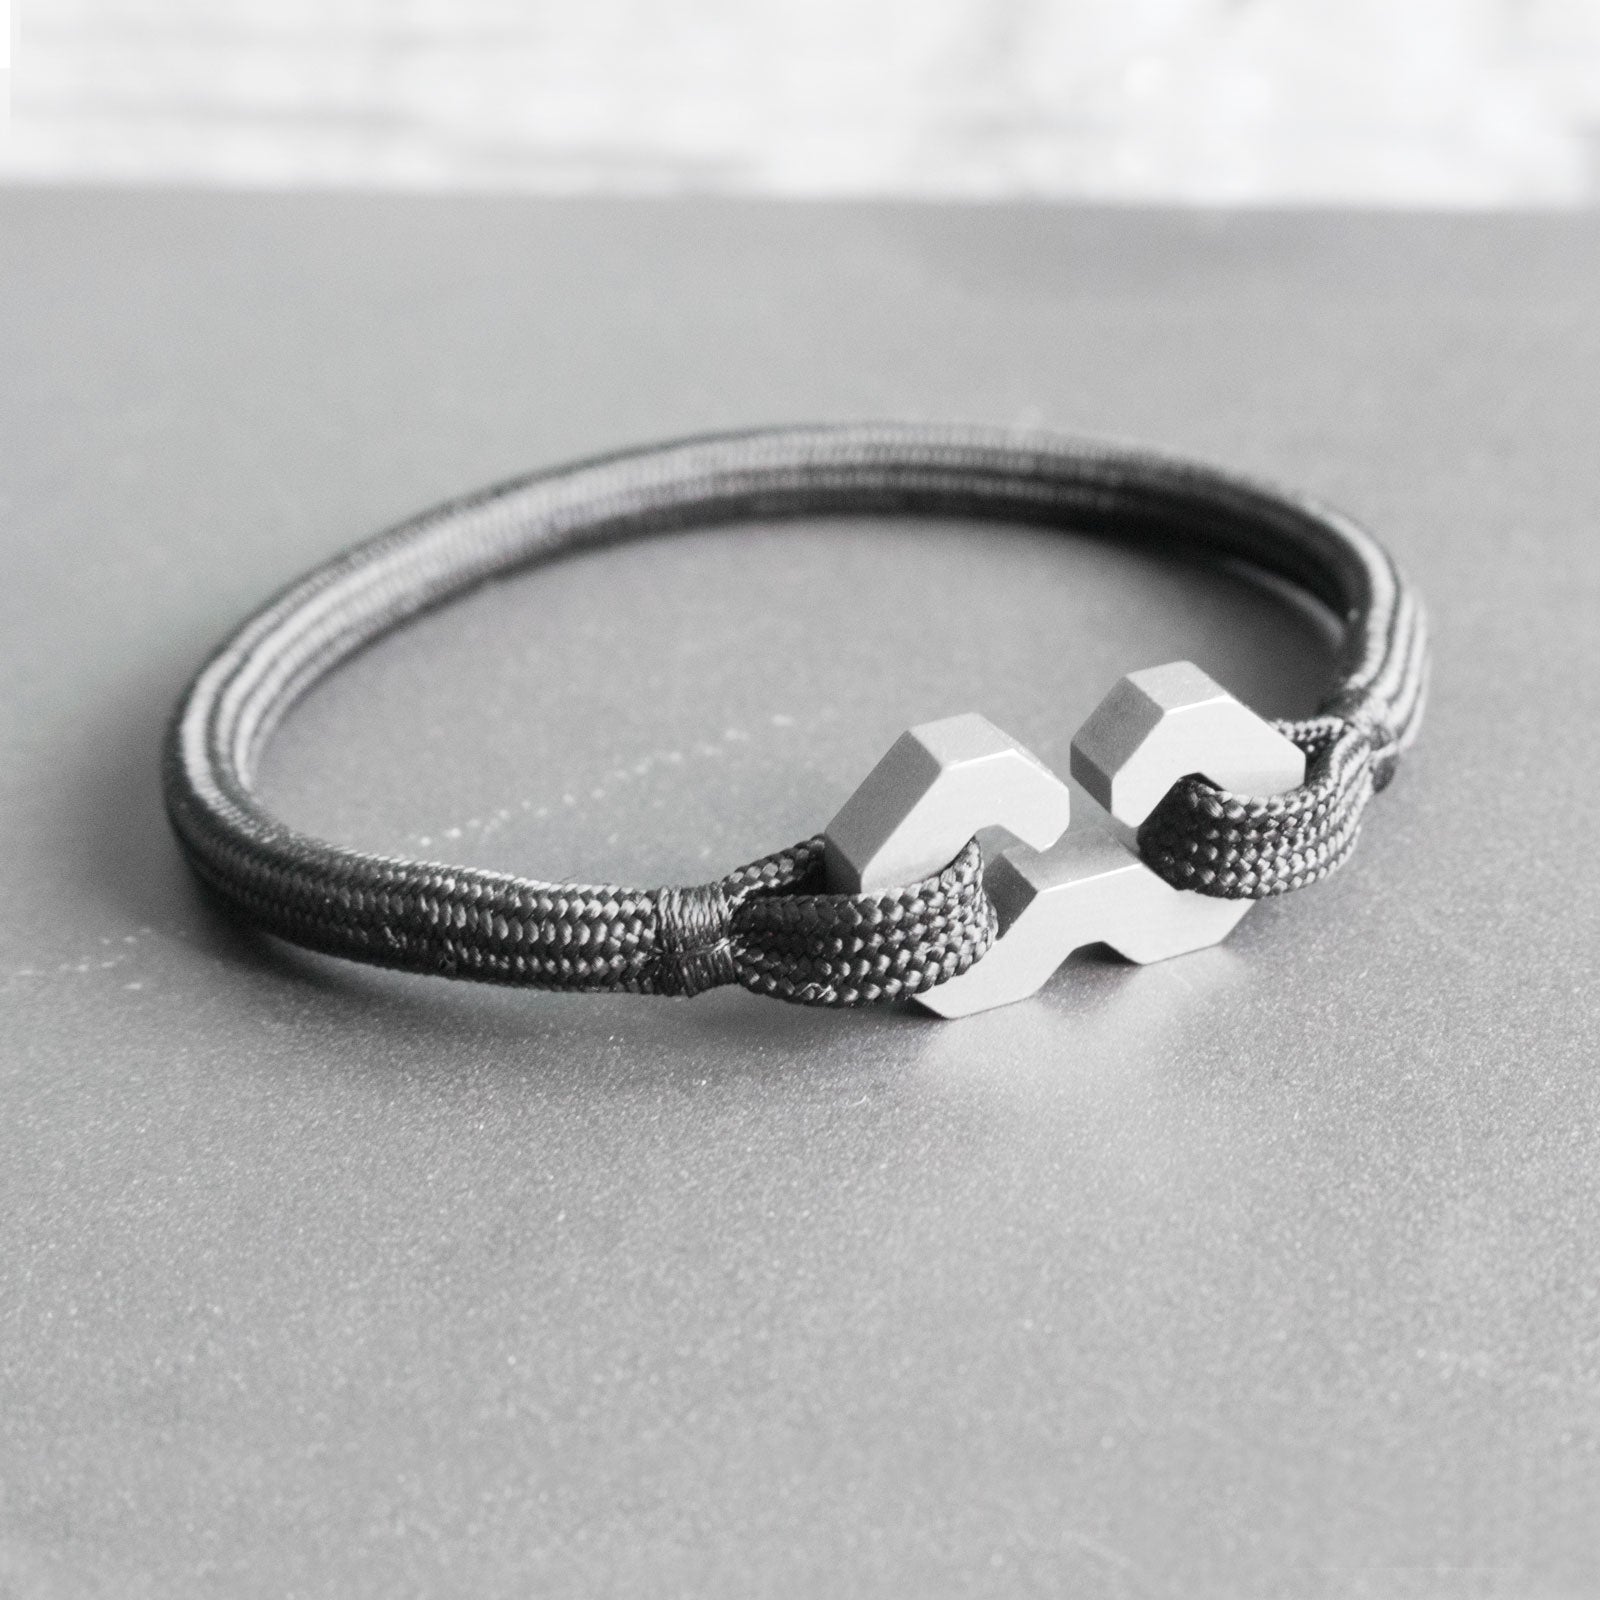 The Menotte is a minimalist and timeless rope bracelet, handmade from grade 5 titanium and a nearly indestructible rope. The clasp is shaped after a shackle or menotte in french. It elegantly ties and holds the rope, making it a very secure and comfortable fit on the wrist.